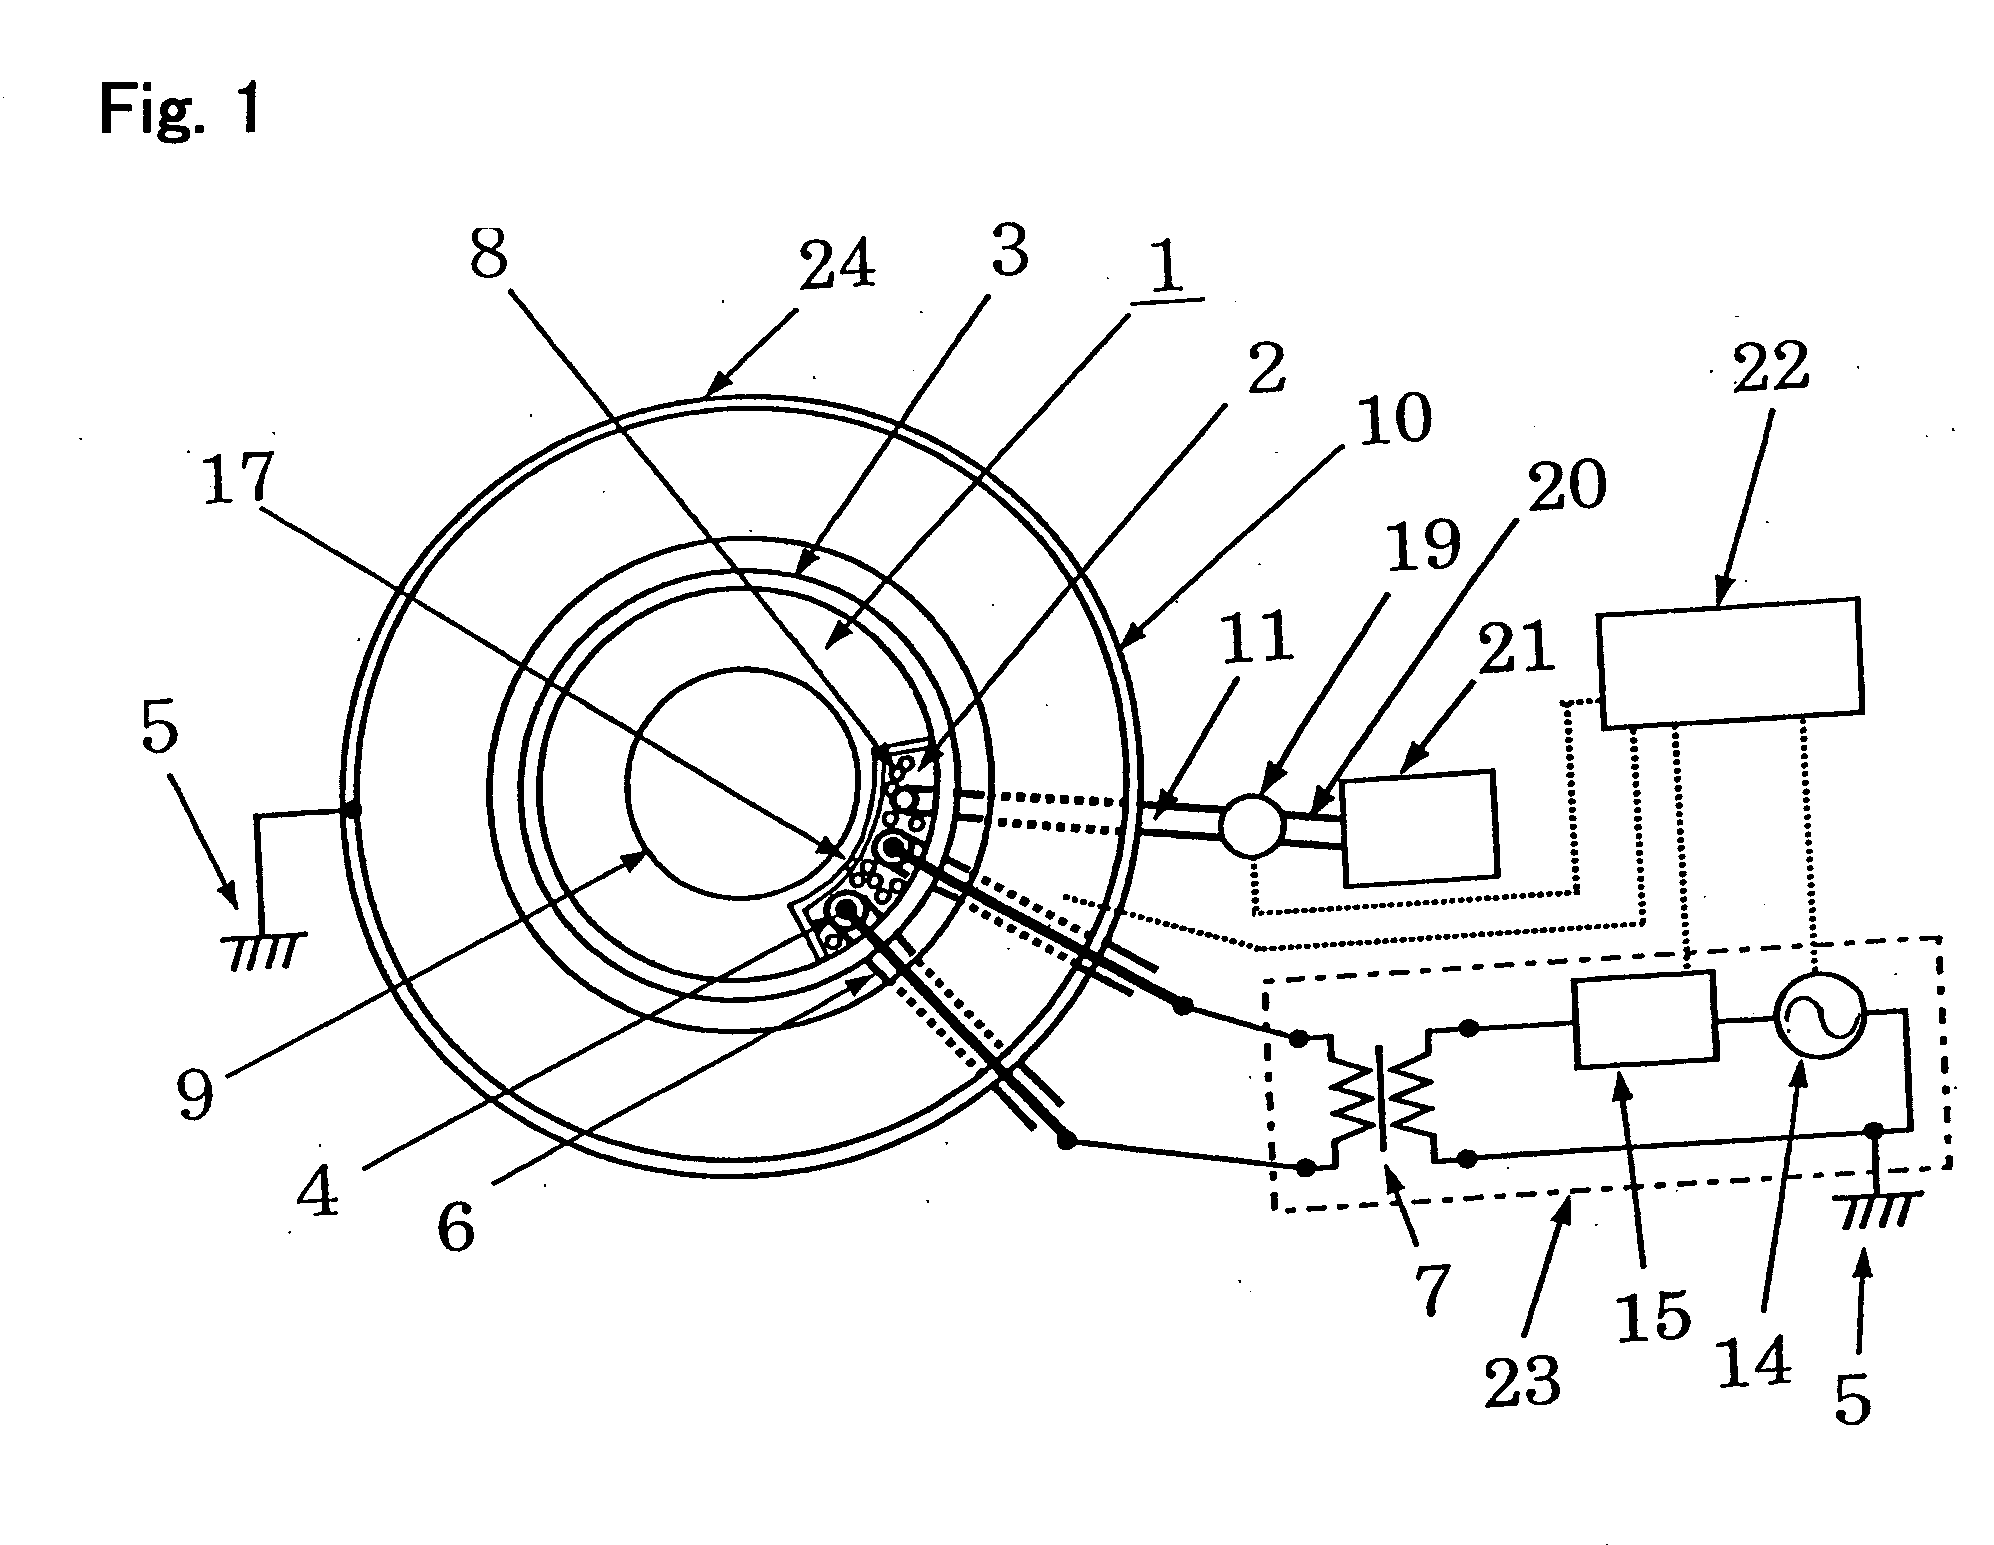 Substrate processing and method of manufacturing device